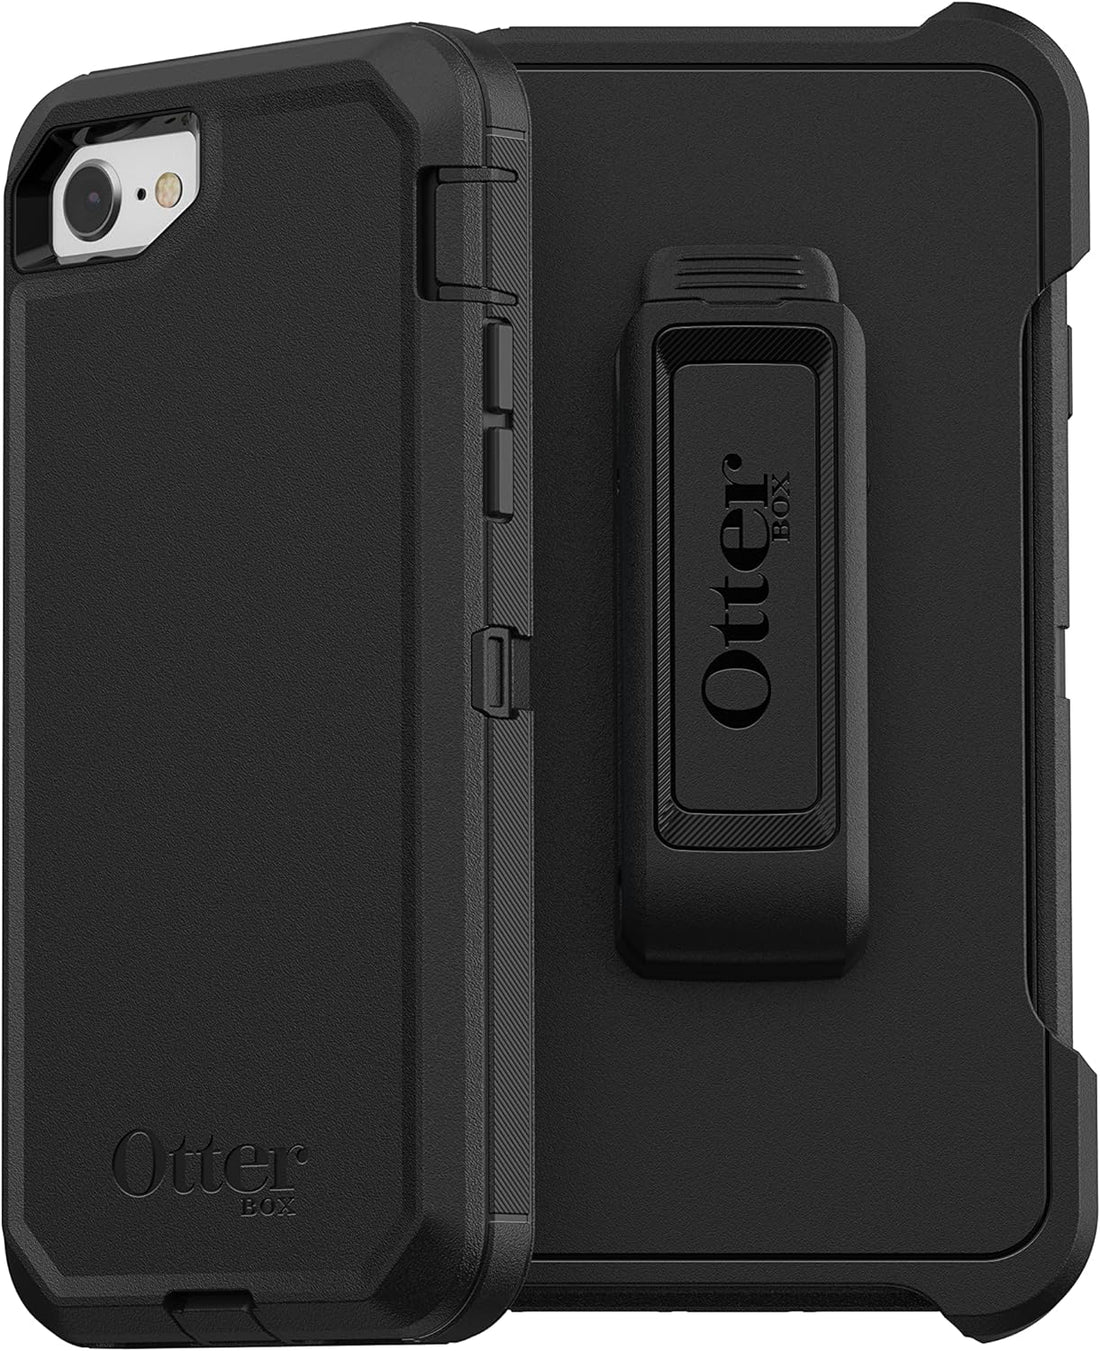 OtterBox DEFENDER SERIES Case &amp; Holster for iPhone 7 / iPhone 8 - Black (Certified Refurbished)